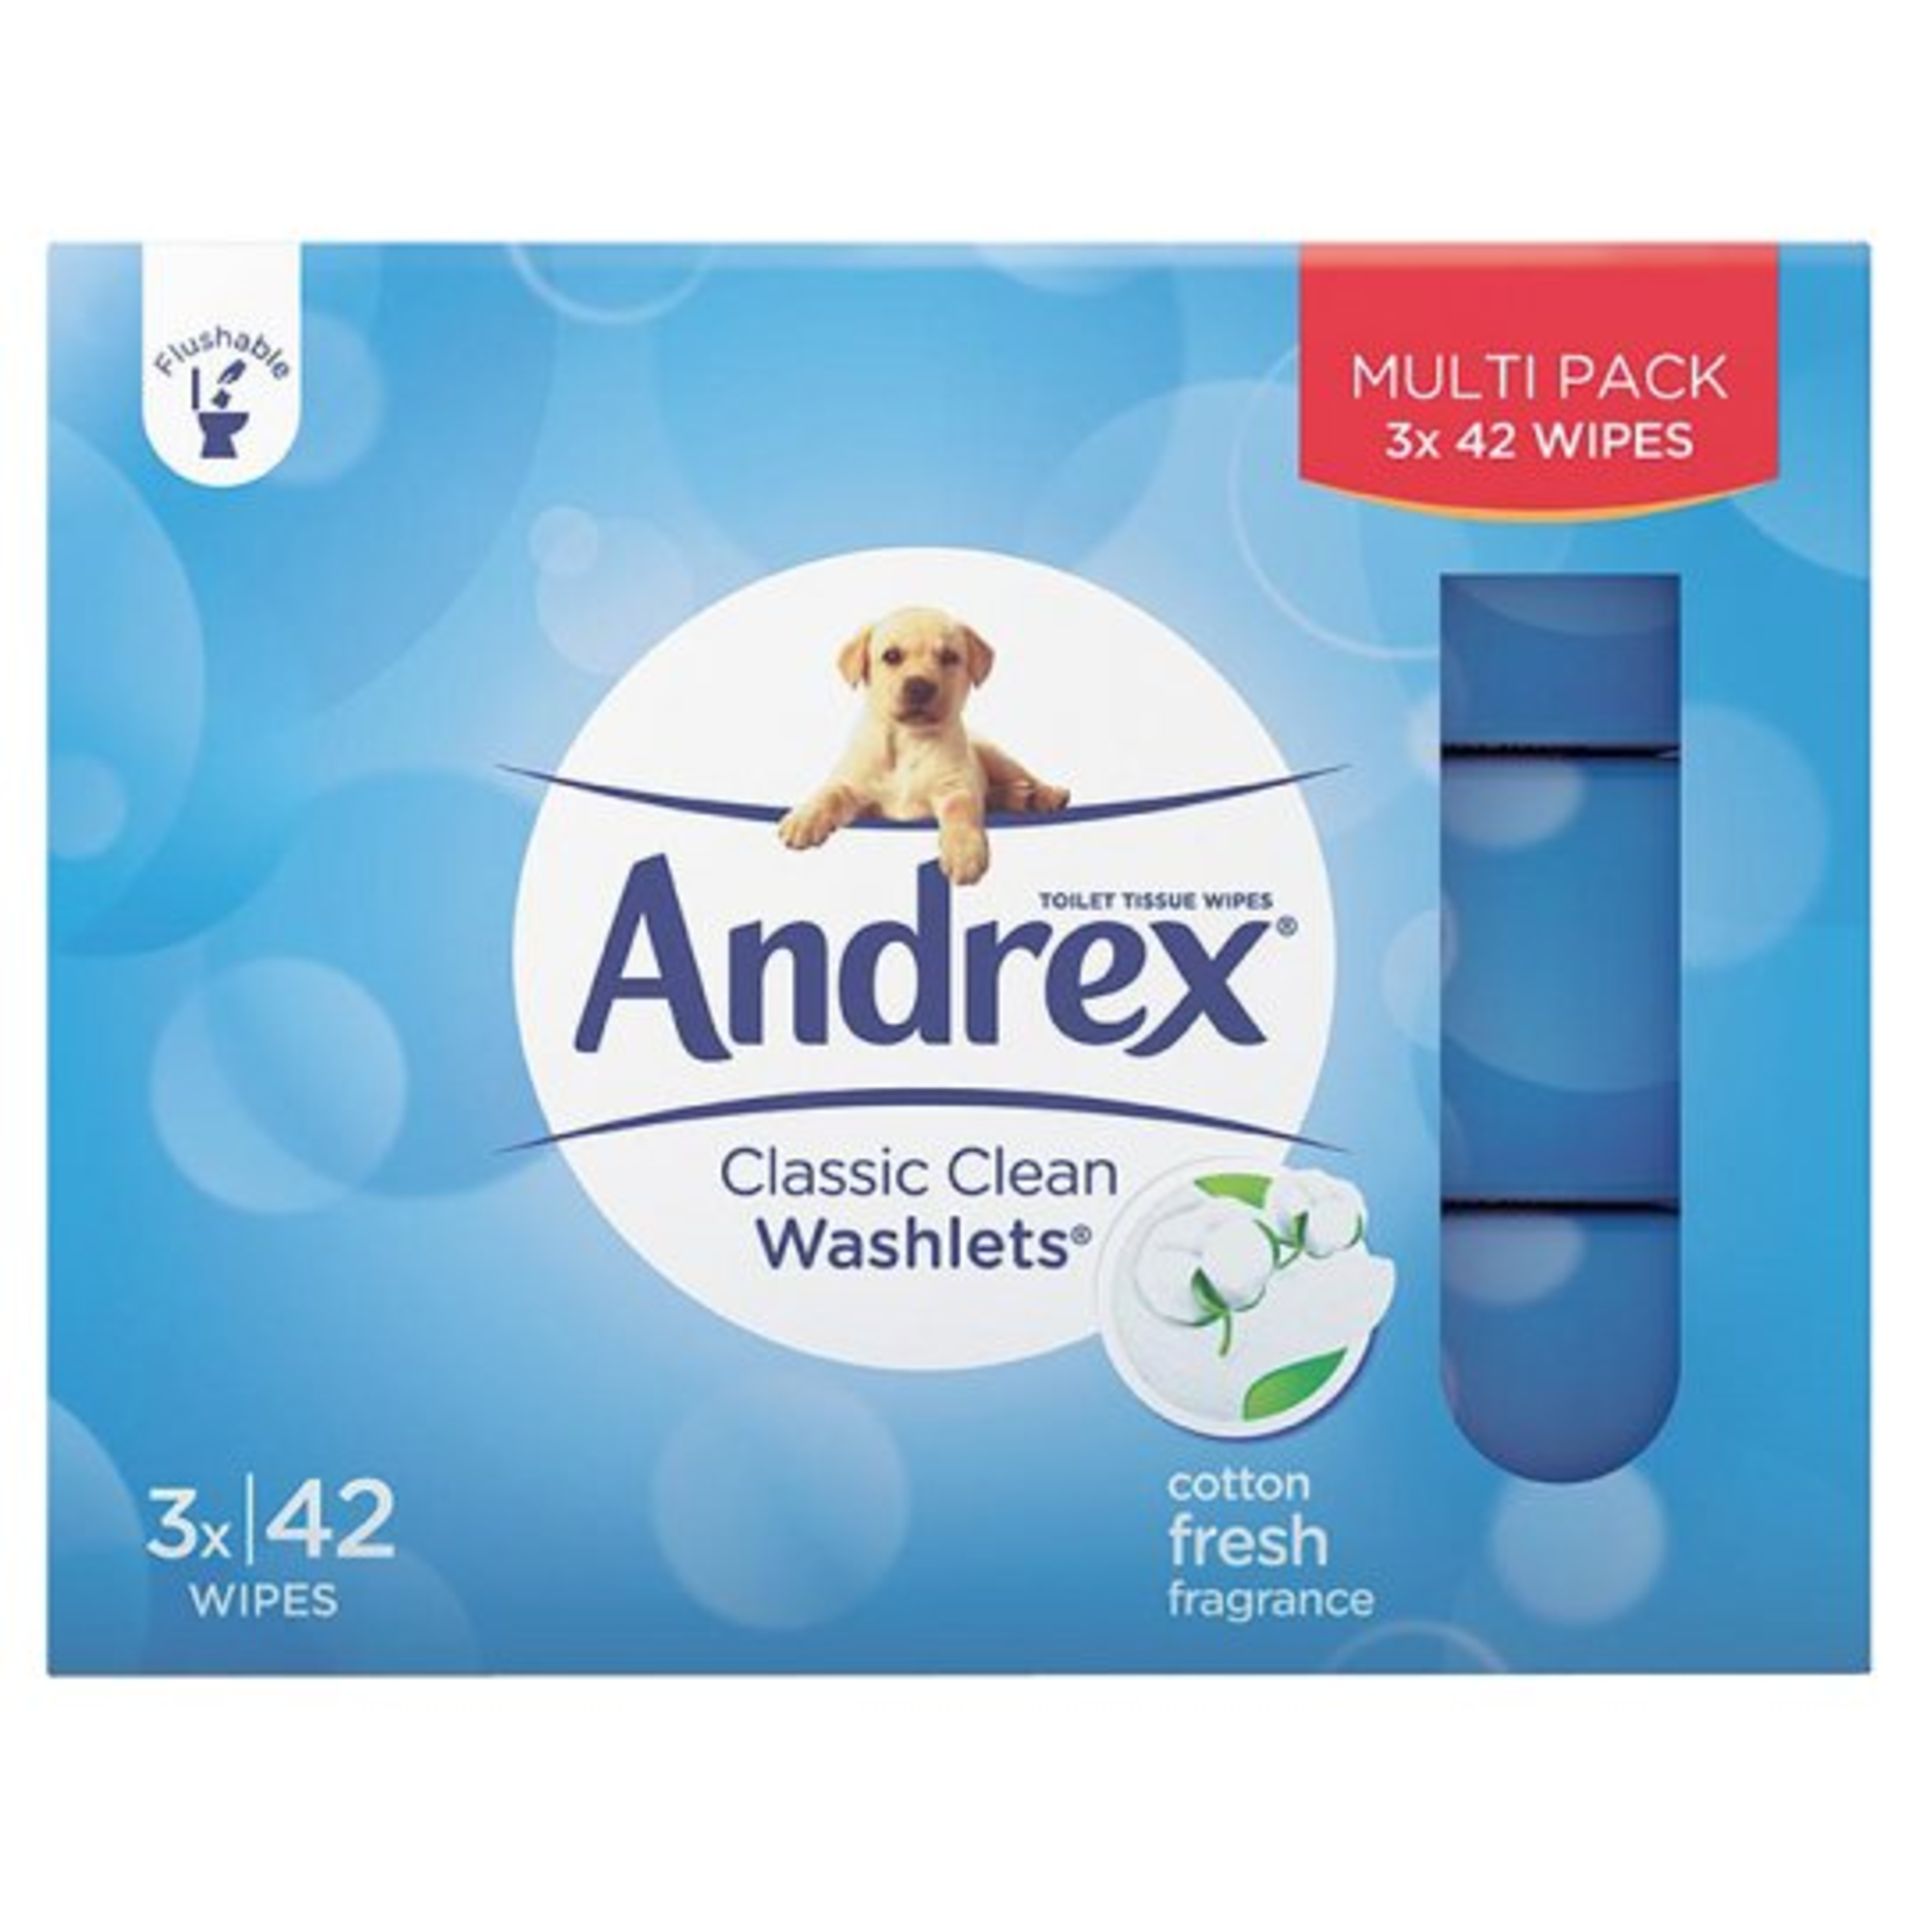 V *TRADE QTY* Brand New Andrex Classic Clean Washlets 3 Pack X 4 YOUR BID PRICE TO BE MULTIPLIED